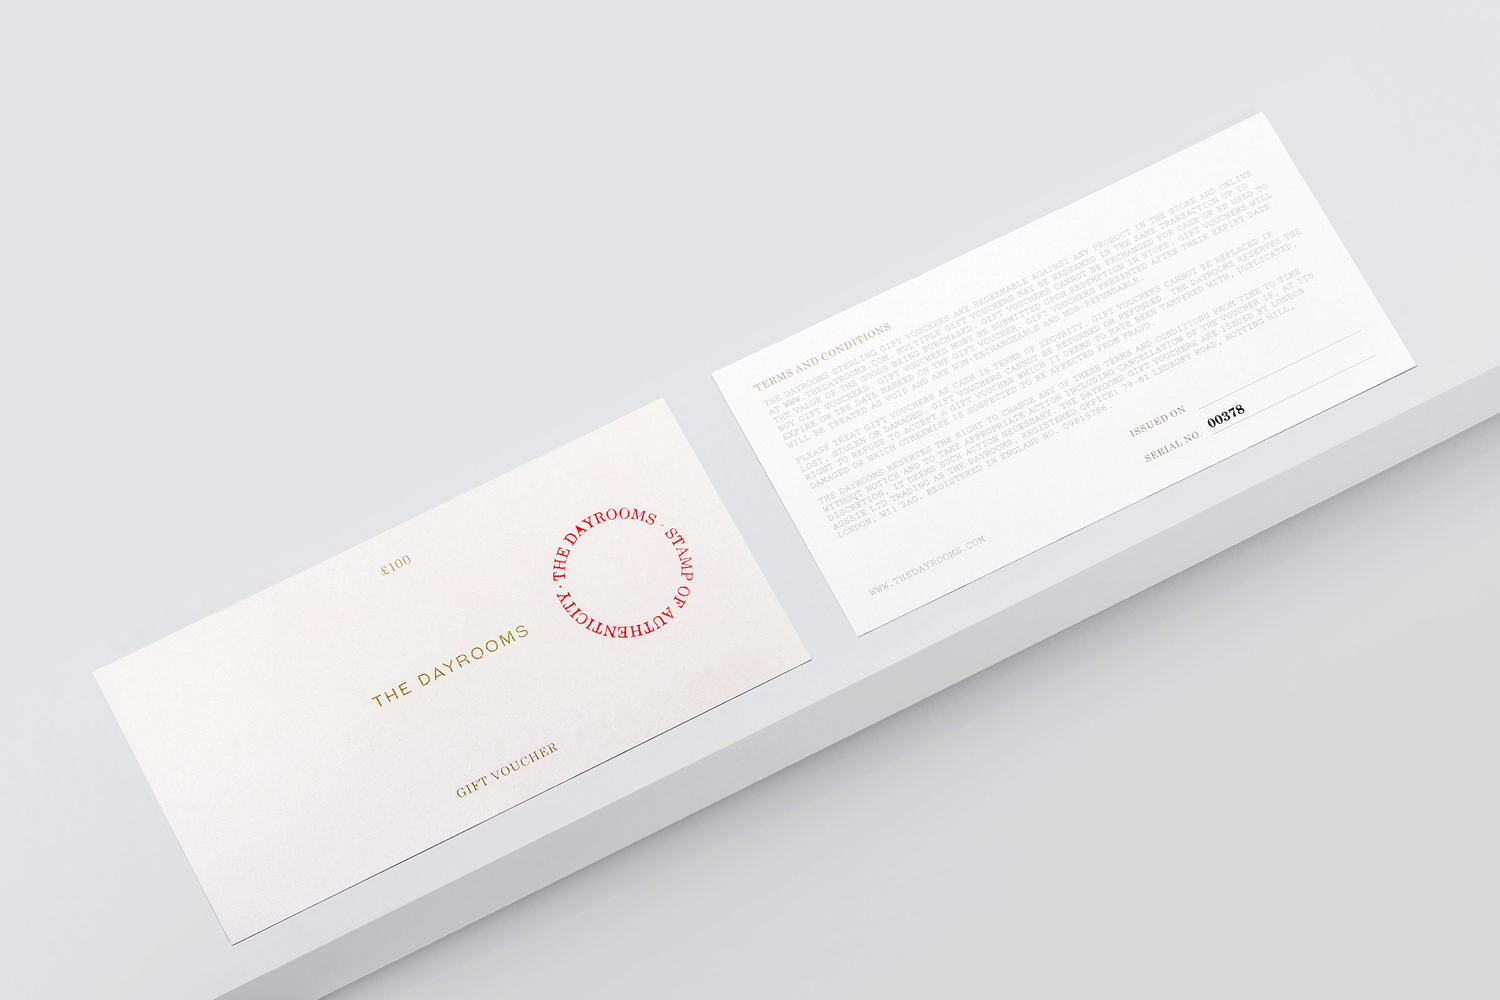 Gift voucher designed by Two Times Elliott for Australian fashion boutique in London The Dayrooms